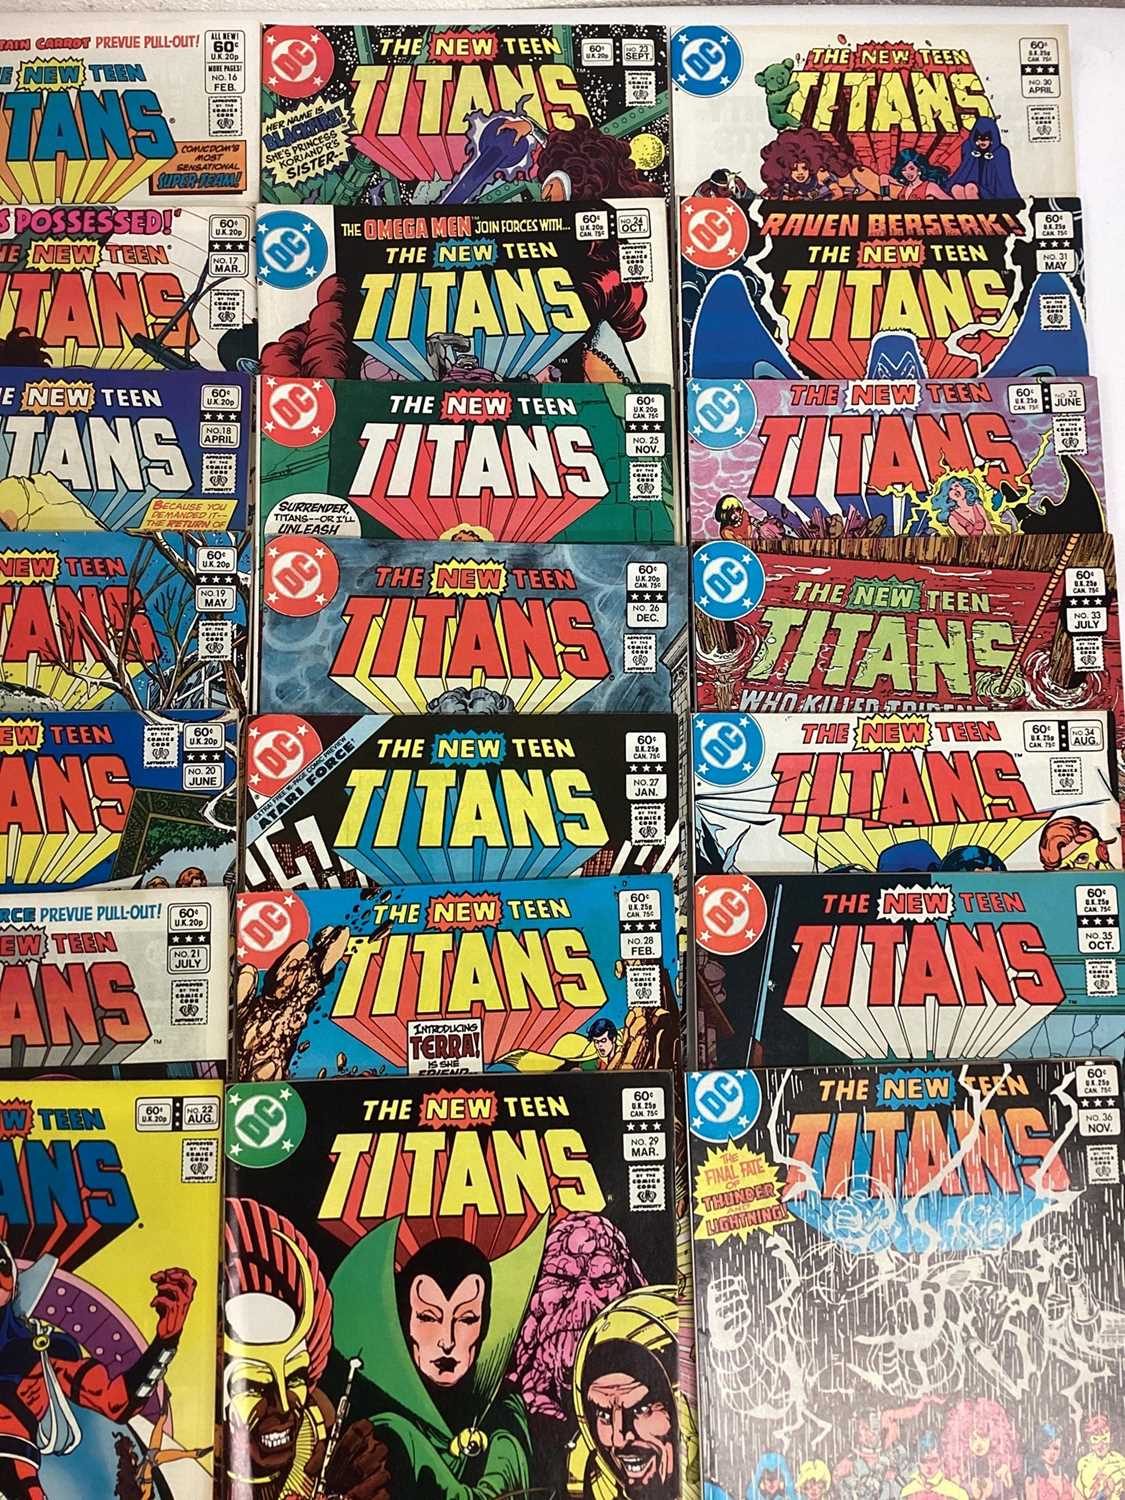 Large quantity of 1980's DC Comics, The New Teen Titans #1 #3-41 #45-47 together with Two annuals #1 - Image 4 of 12